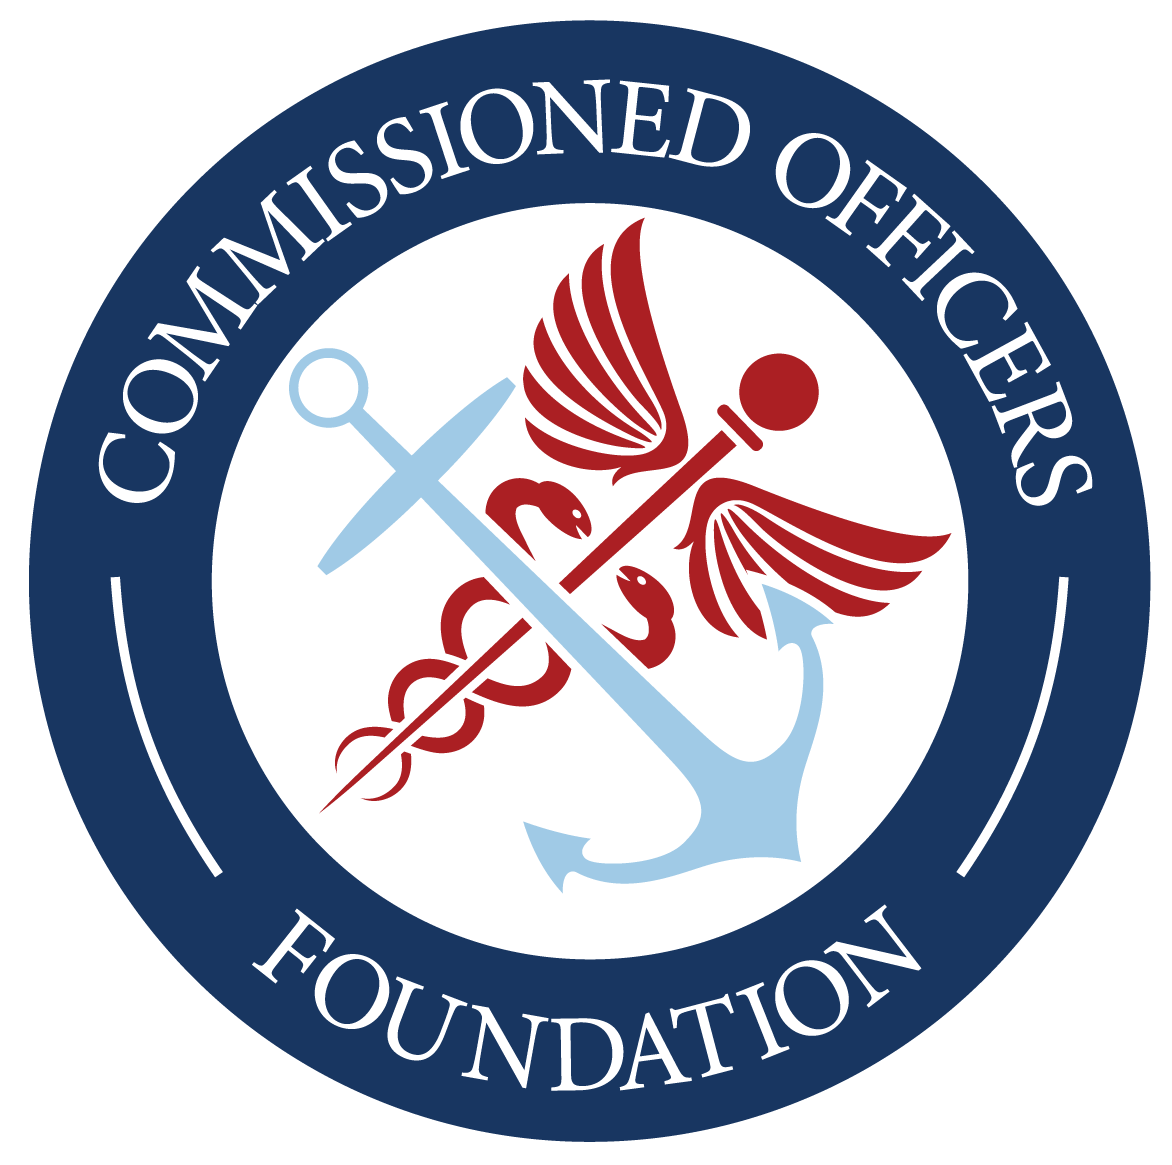 PHS Commissioned Officers Foundation Portal logo